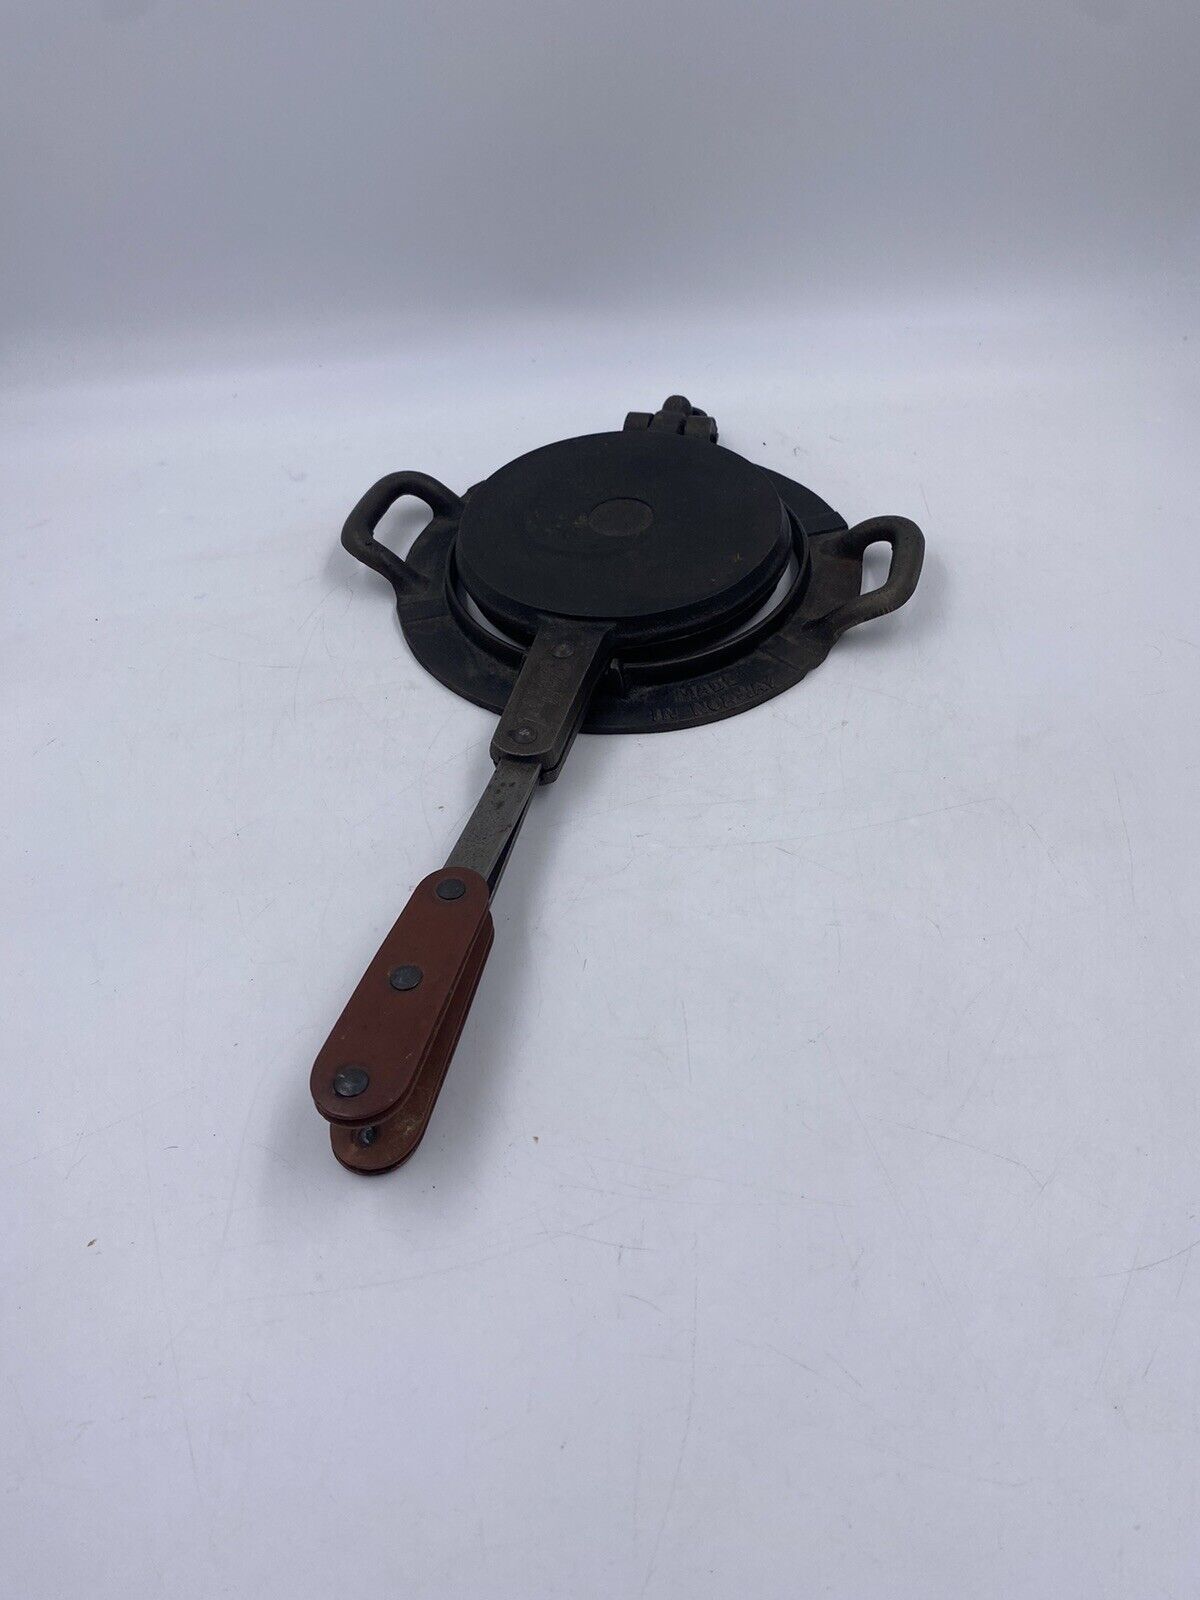 Vintage Jotul Cast Iron Crepe Maker with Stand Made in Norway